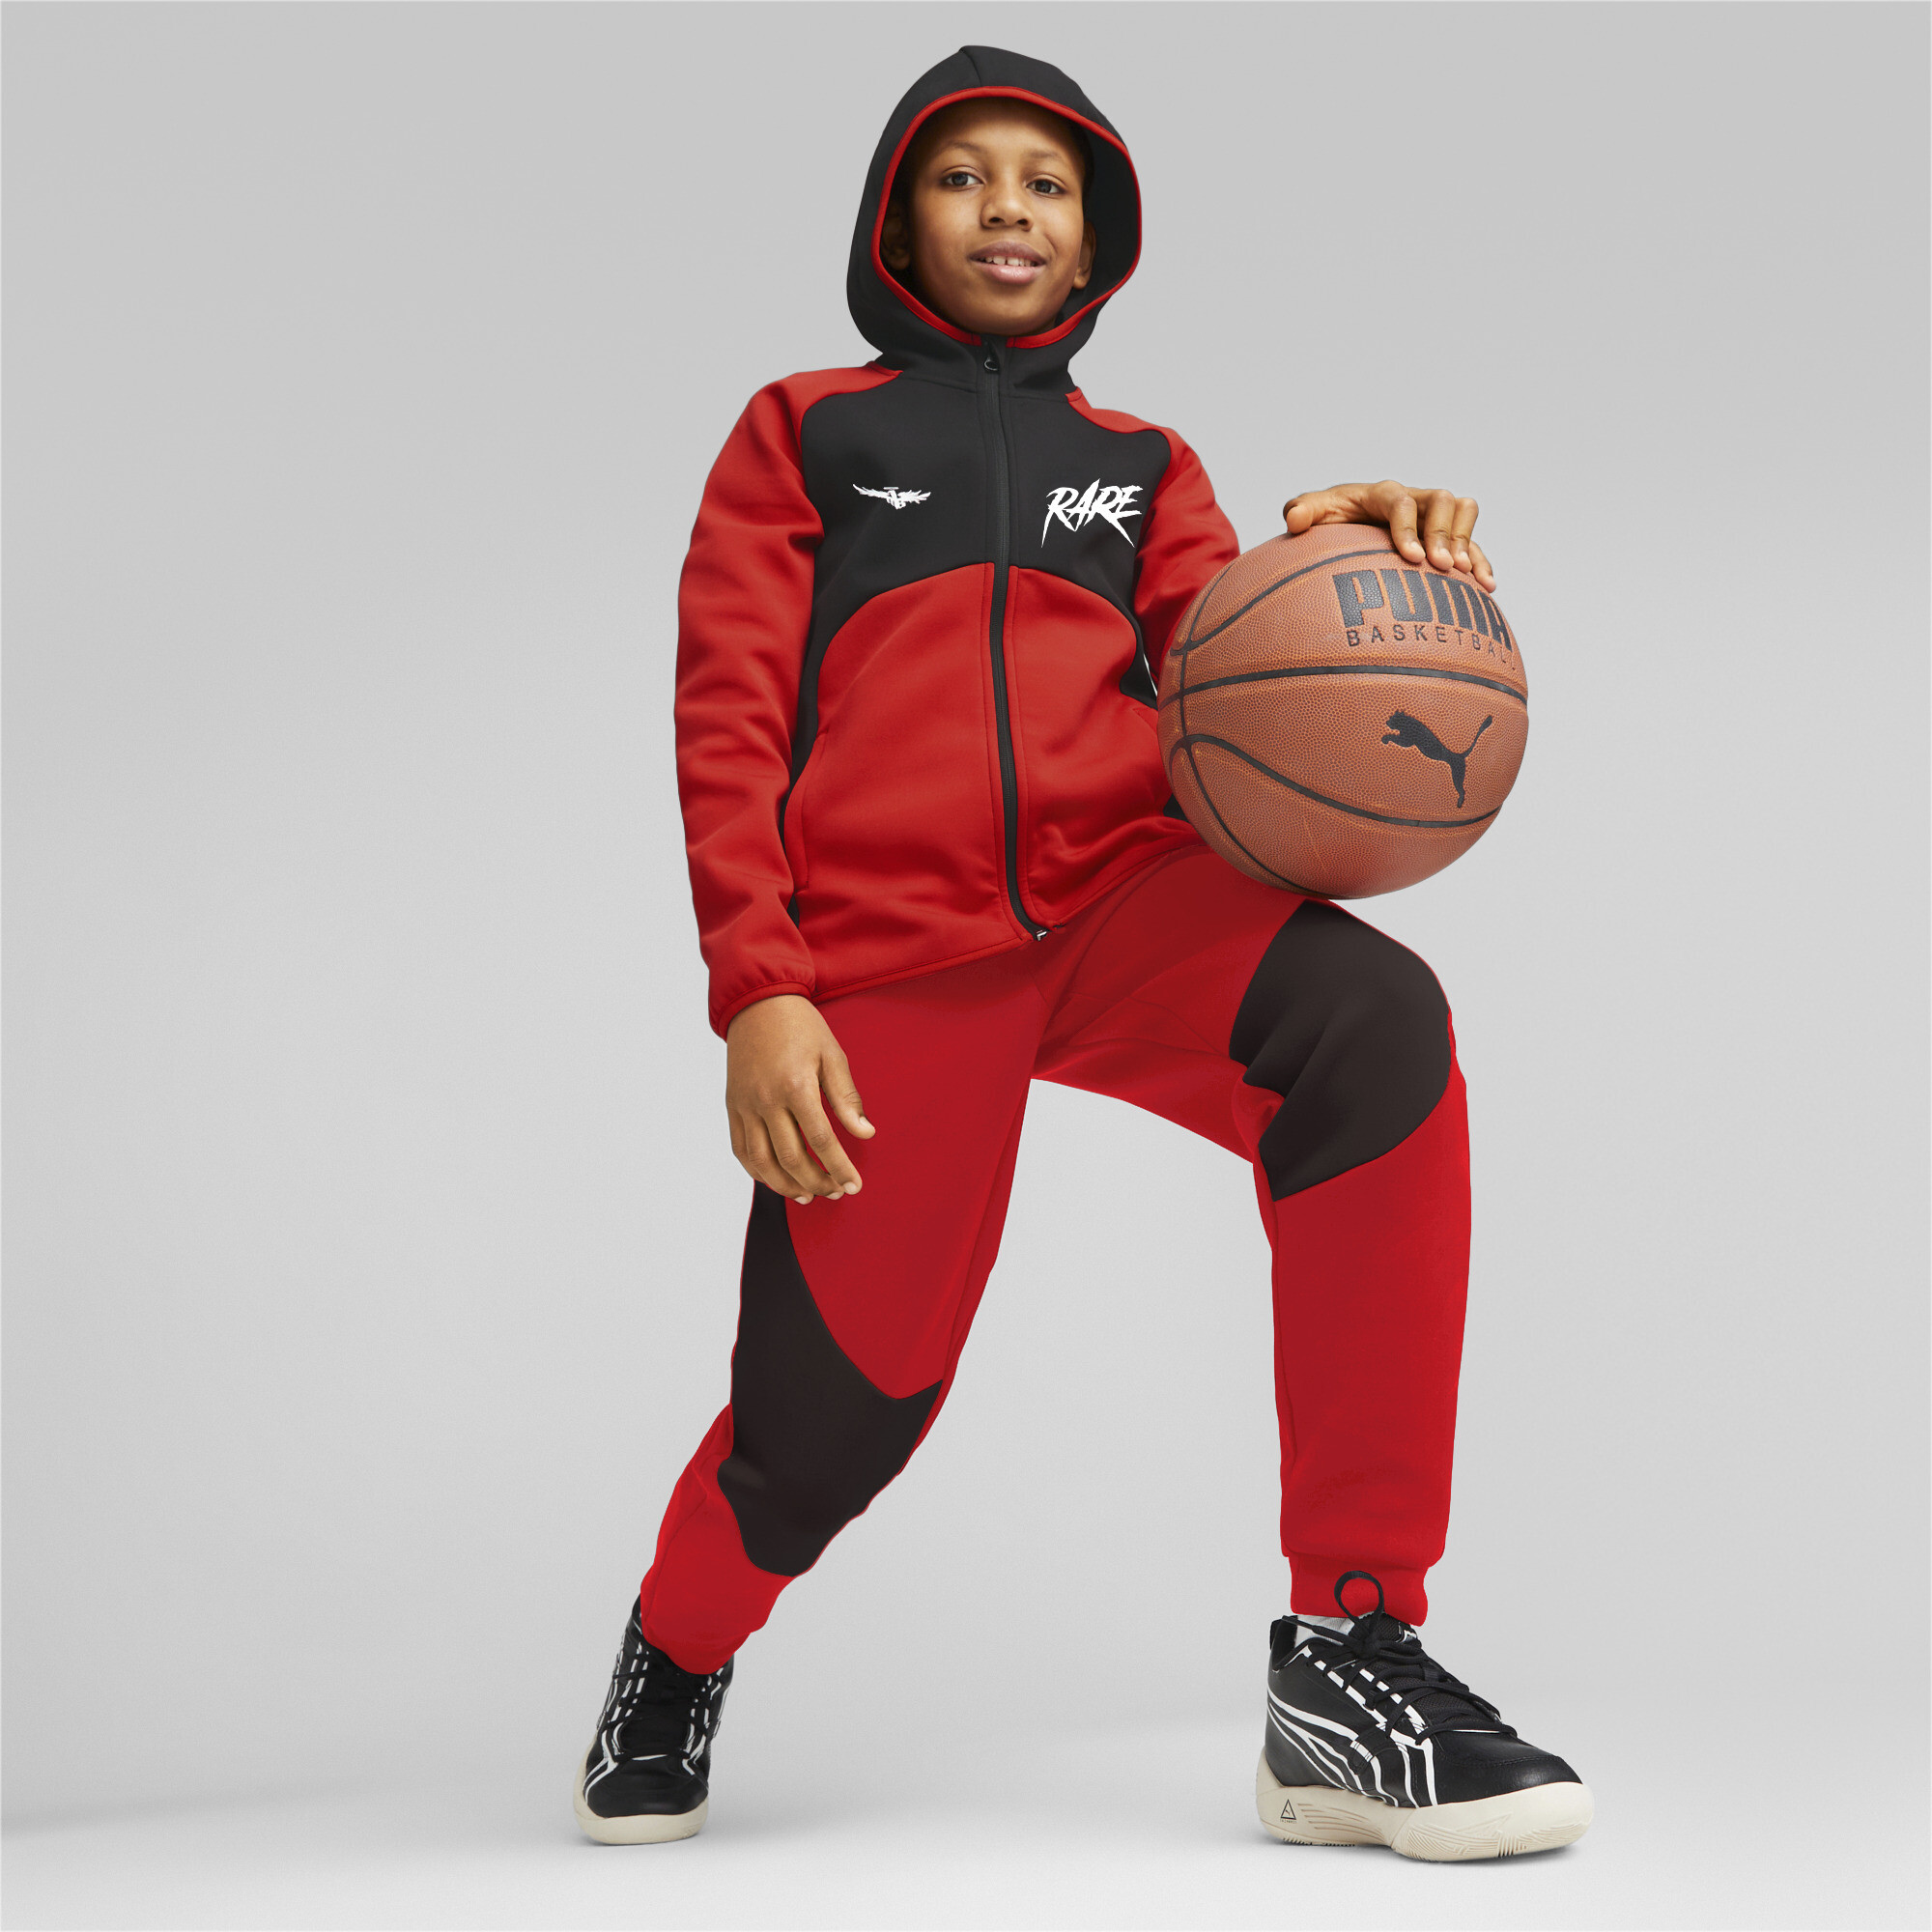 PUMA X MELO Dime Jacket In Red, Size 11-12 Youth